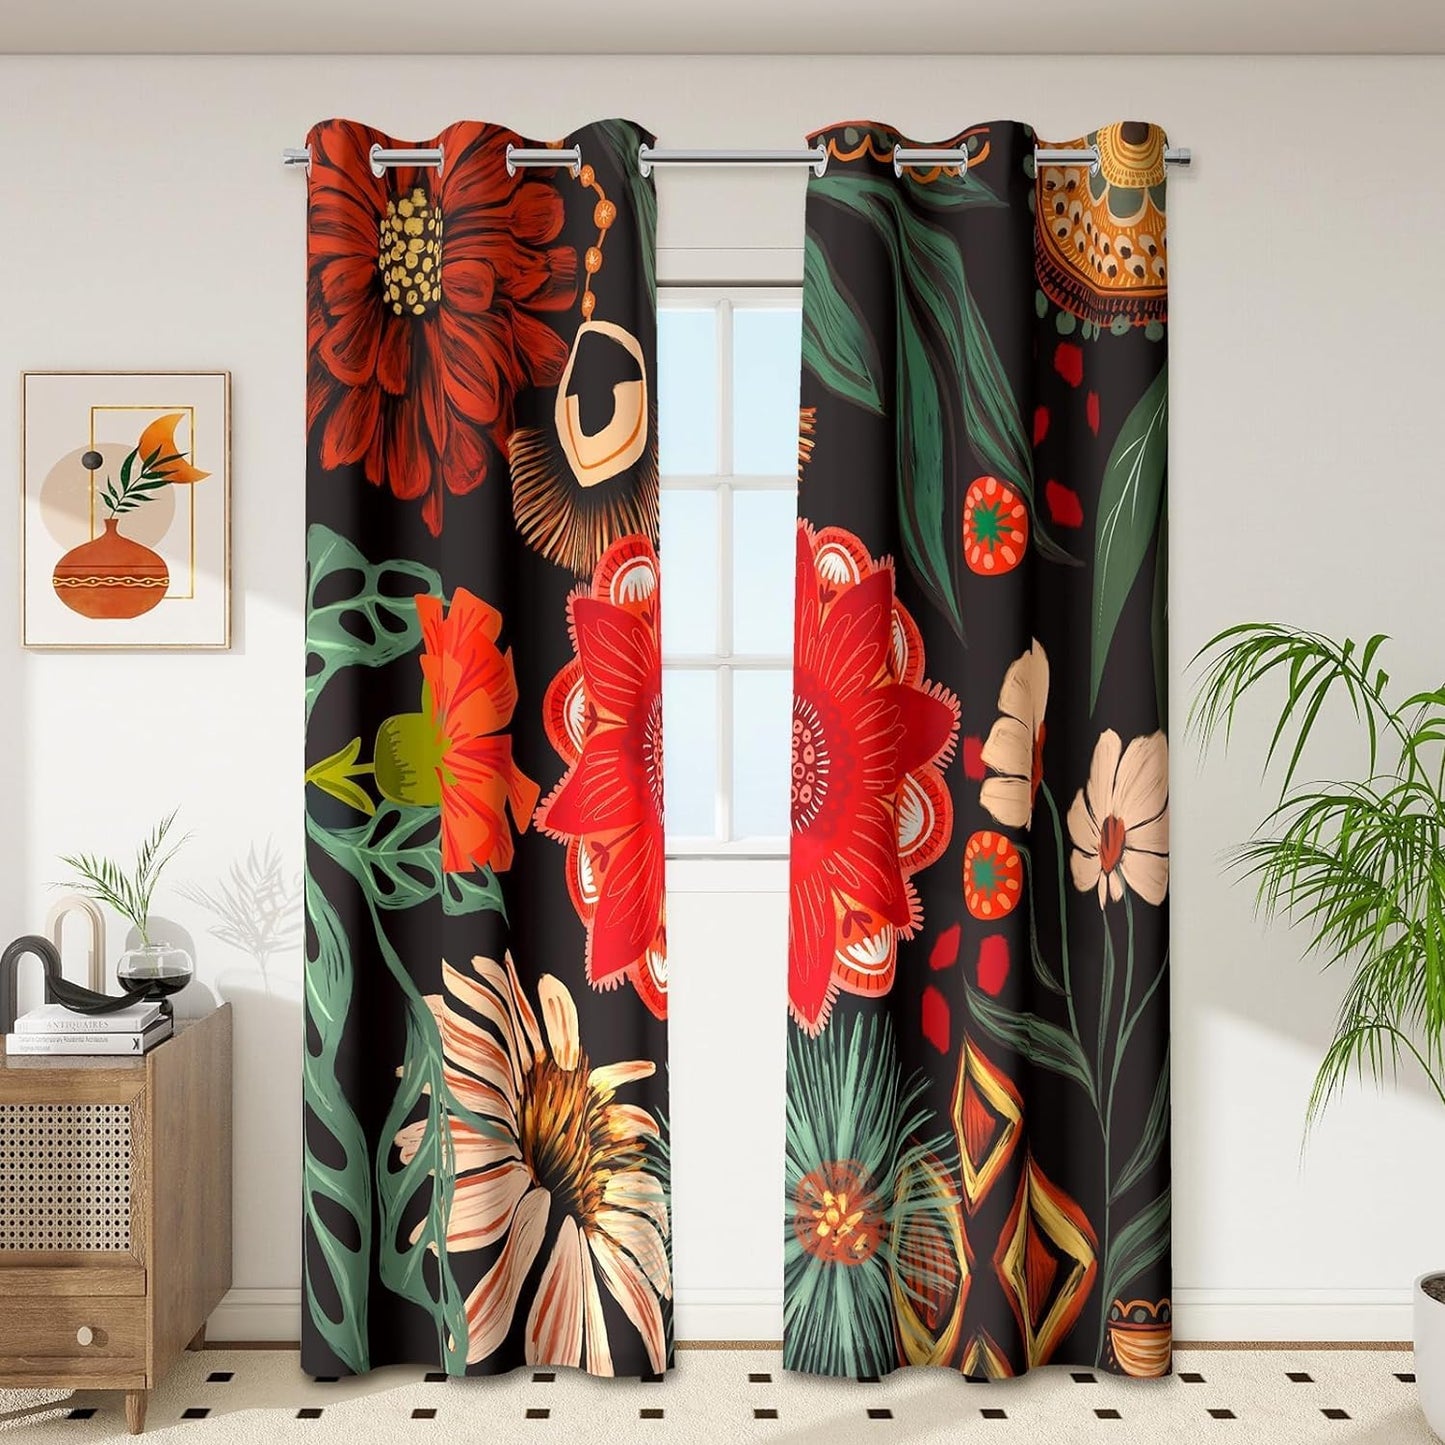 Boho Floral 100% Blackout Curtains for Living Room 96 Inch Long 2 Panels Mid Century Botanical Black Out Curtains for Bedroom Grommet Thermal Insulated Room Darkening Window Drapes,52Wx96L  Tyrot Black Boho Floral Print 42W X 63L Inch X 2 Panels 